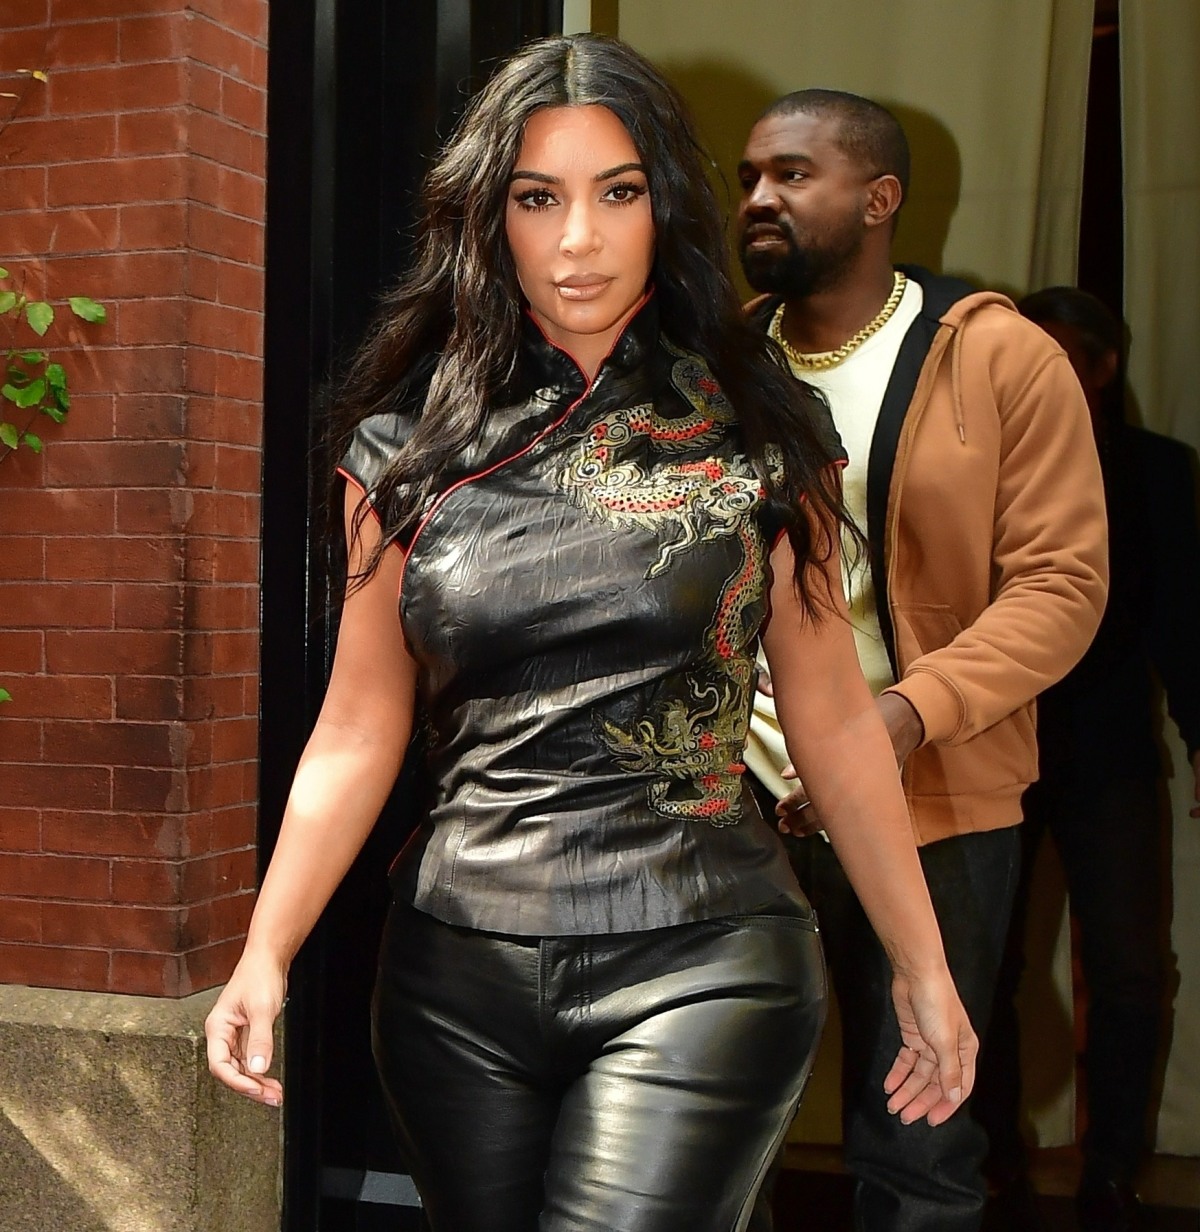 Kim Kardashian steps out of her hotel in Asian inspired top in NY